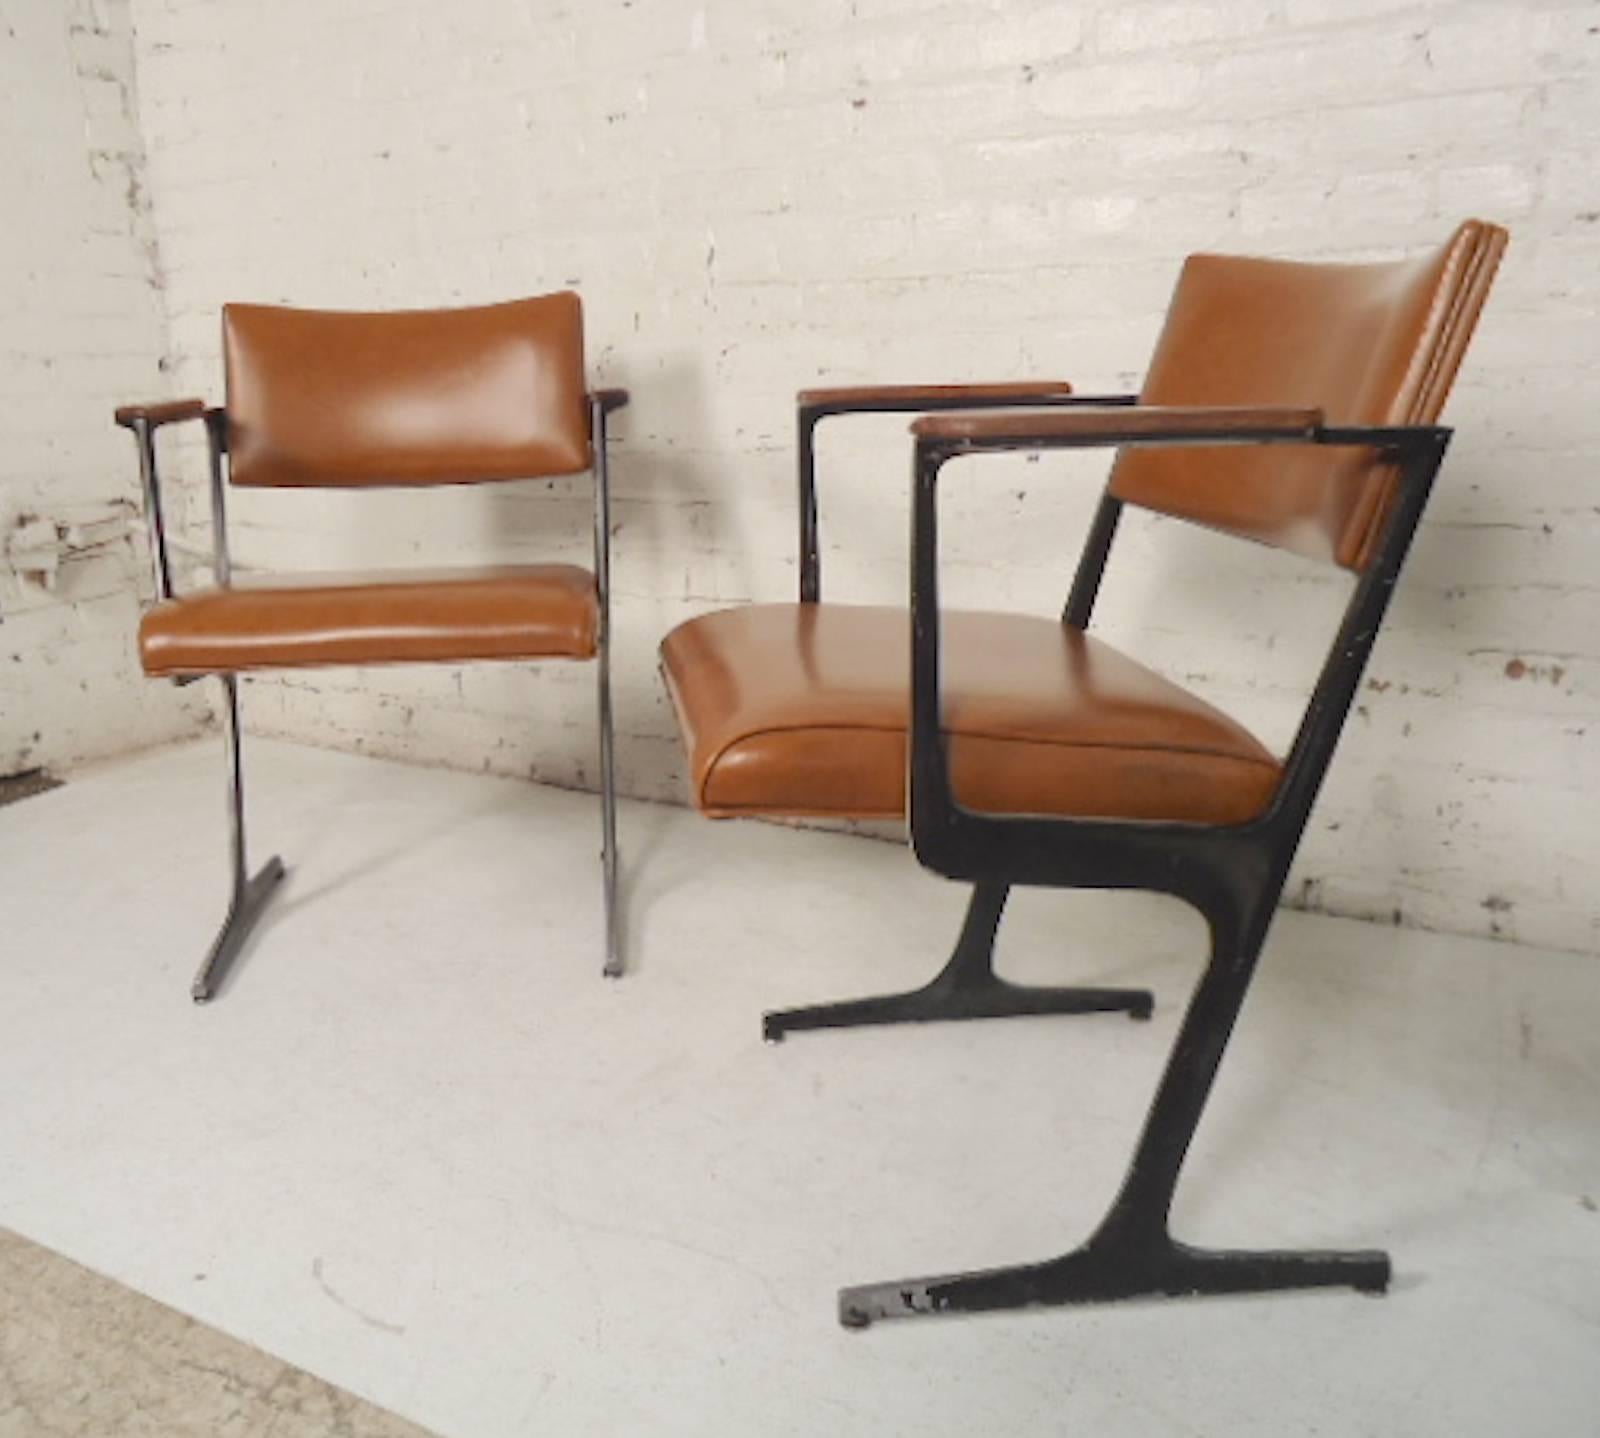 Unusual metal base armchairs with vinyl fabric and wood arm rests. Great for living room or office.

(Please confirm item location - NY or NJ - with dealer).
 